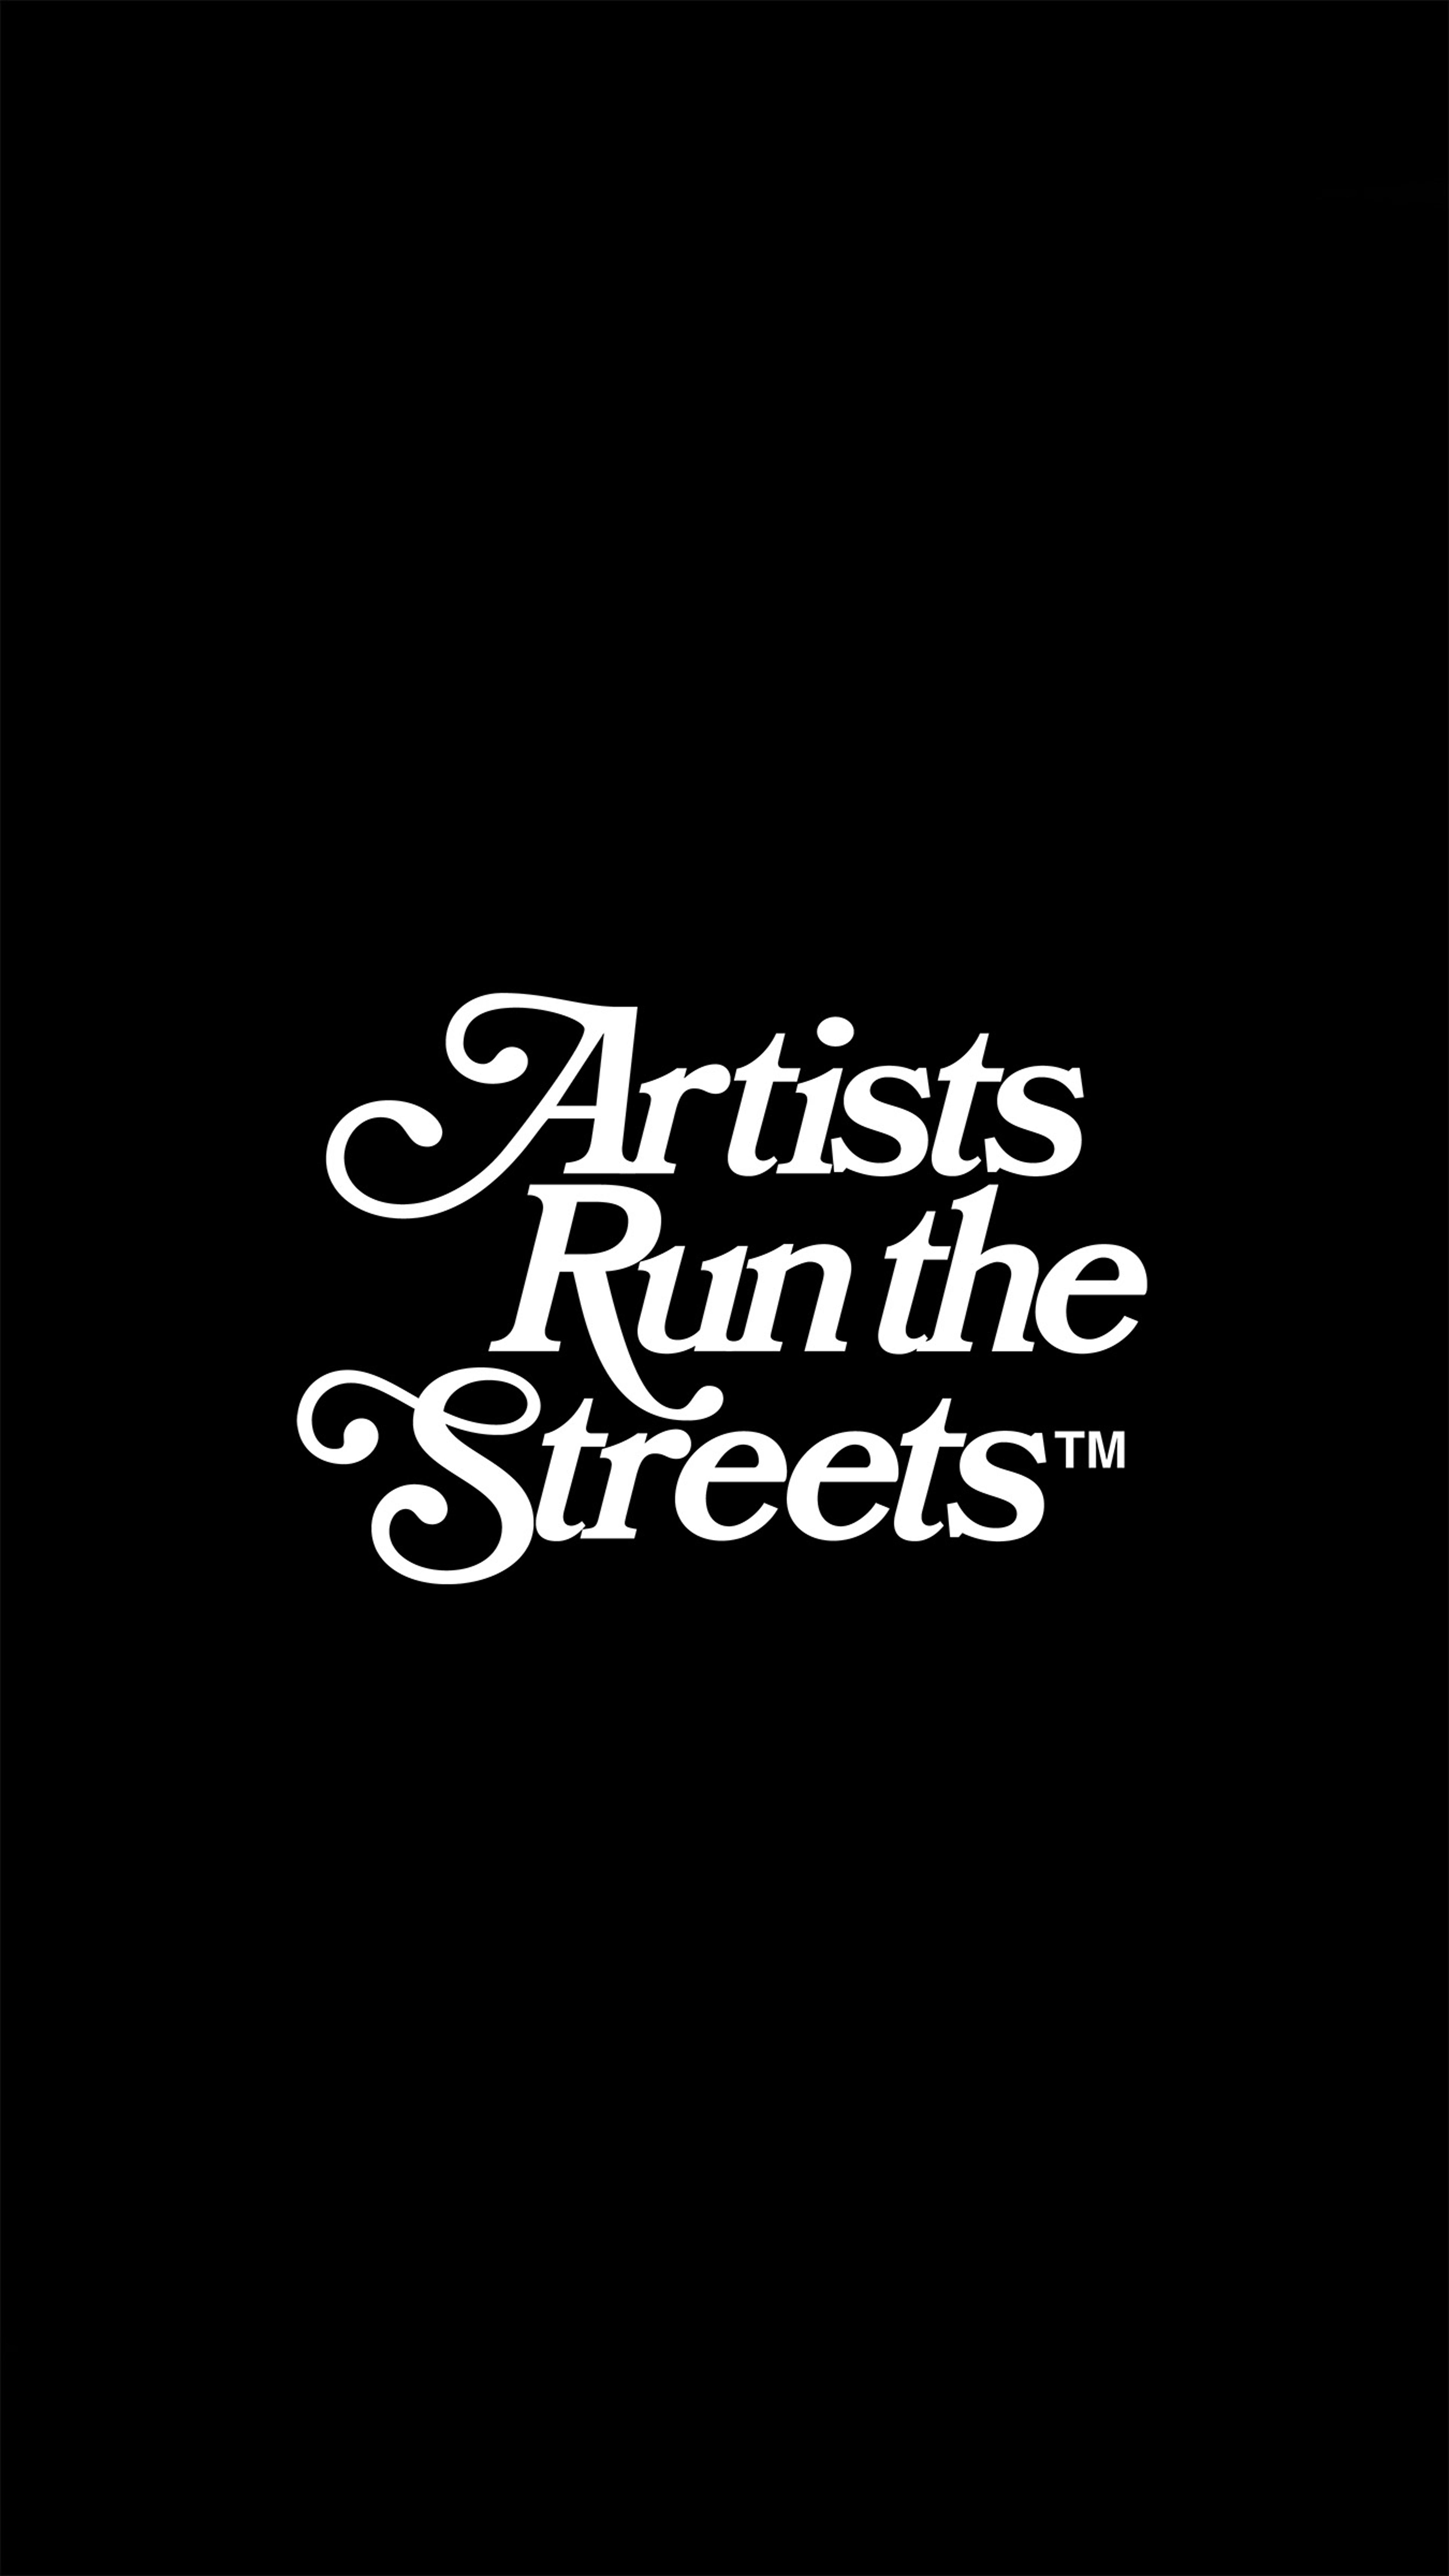 Preview image for the show titled "Artists Run The Streets™ Collection" at April 29, 2024